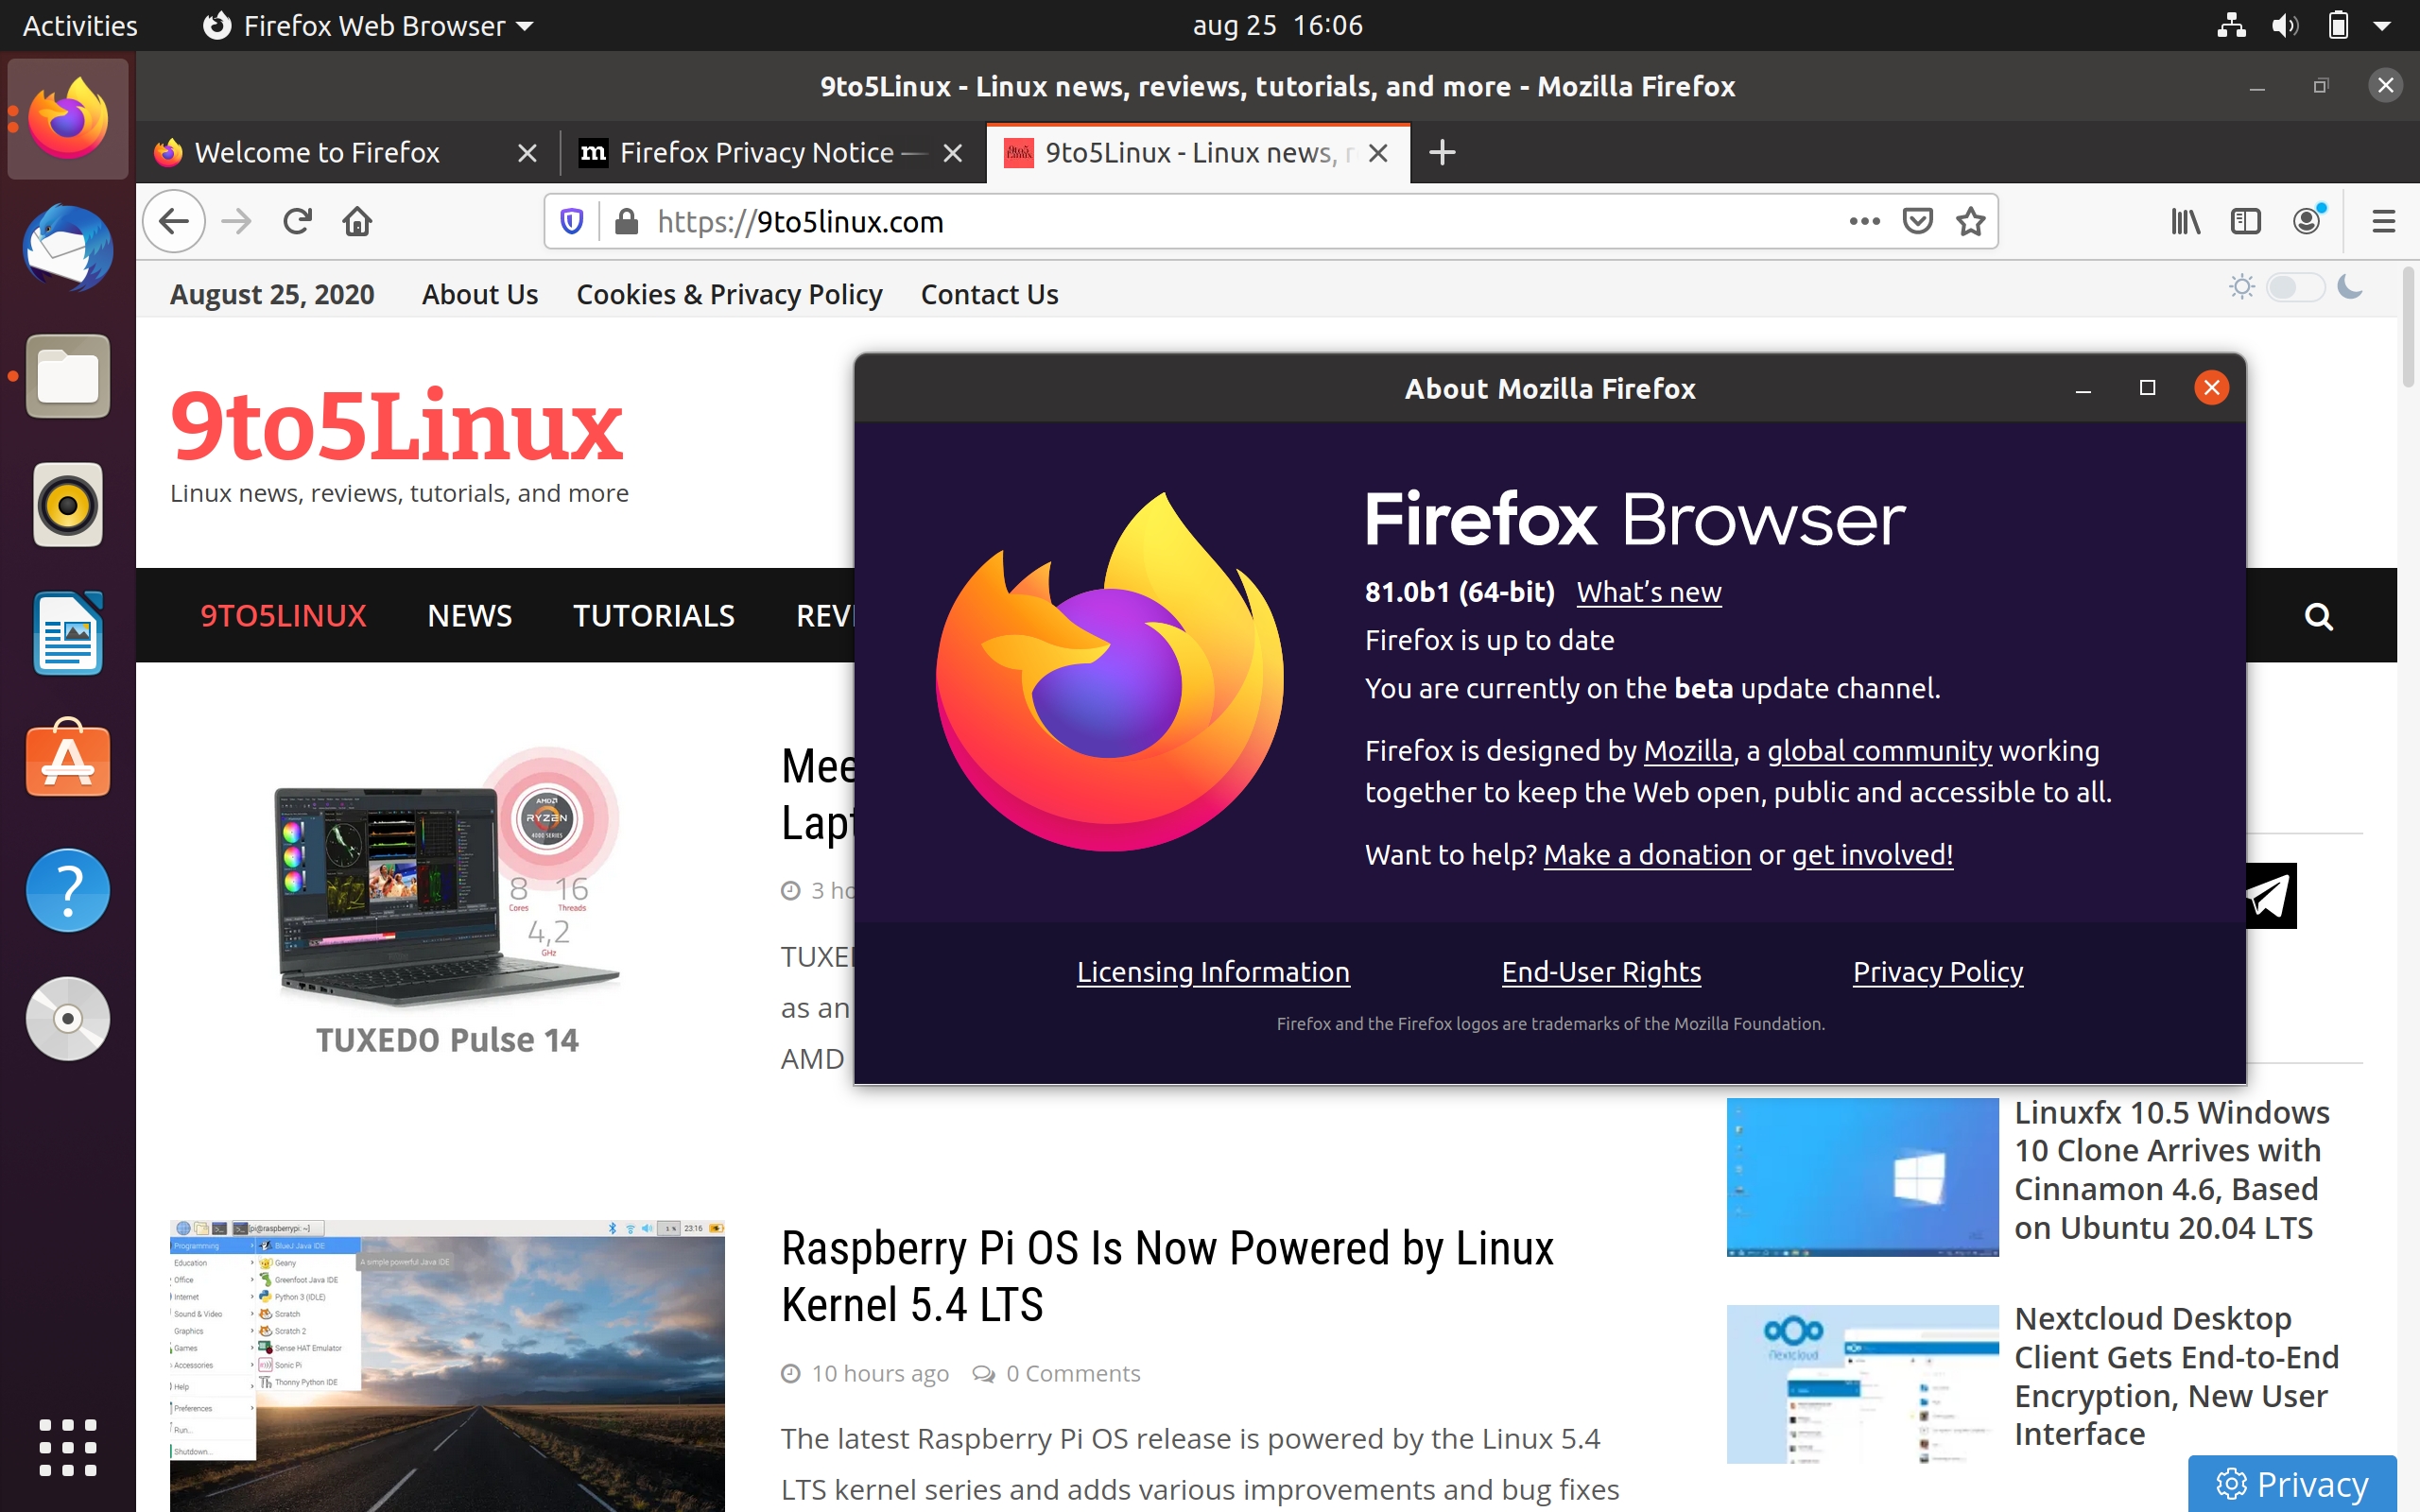 Firefox 81 Enters Beta with GPU Acceleration Enabled by Default on Linux